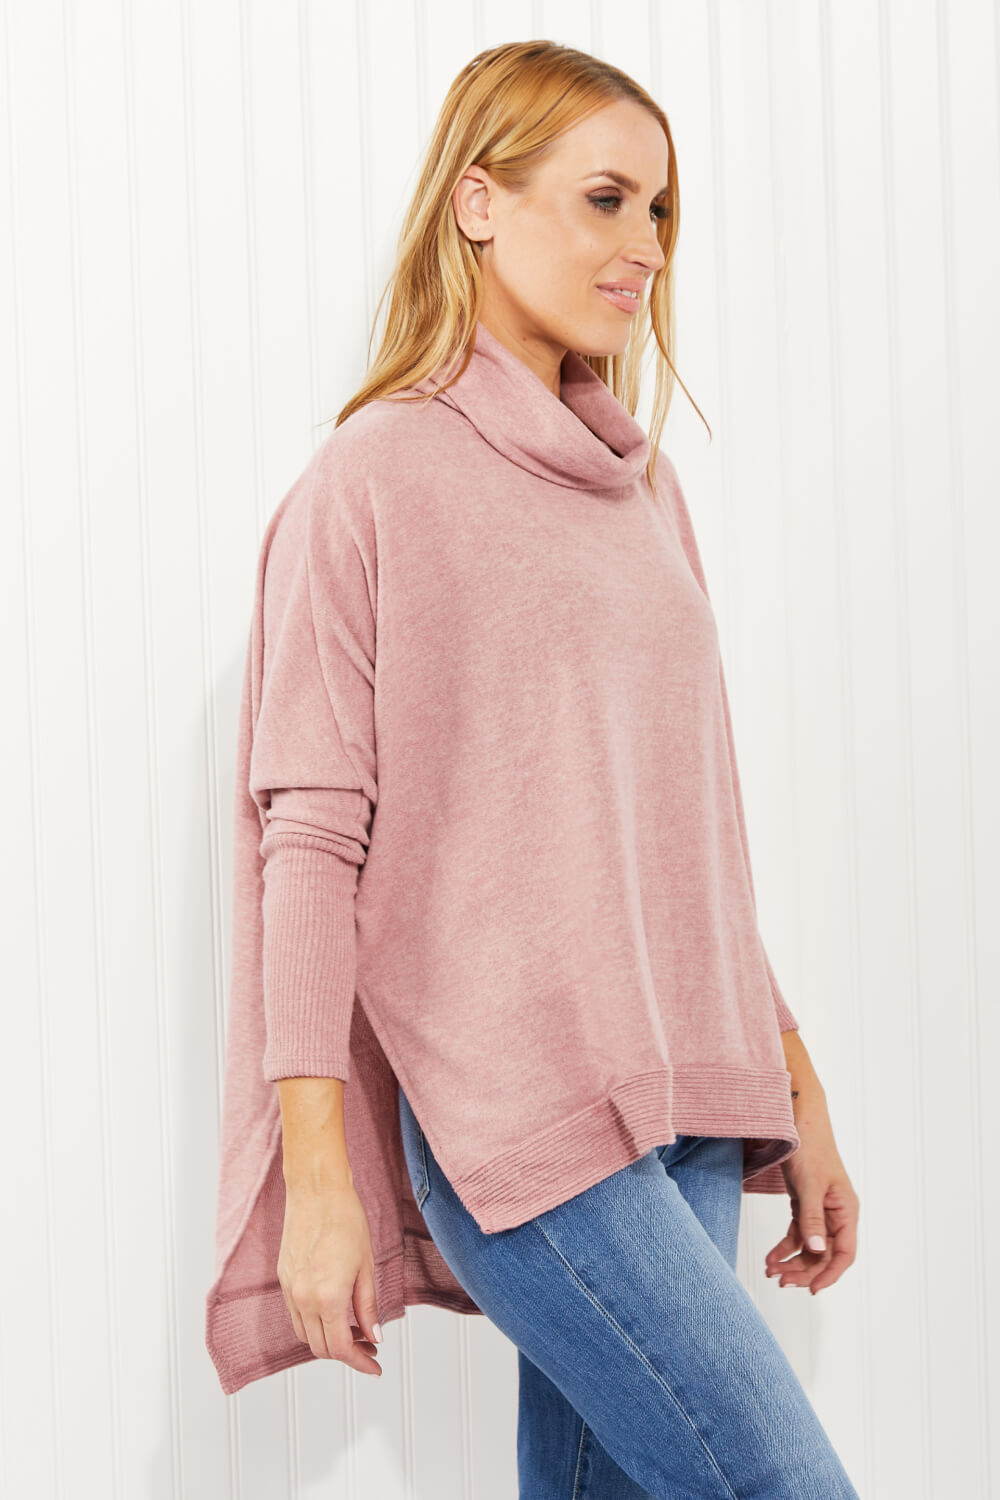 Zenana Love and Cuddles Full Size Cowl Neck Poncho Sweater in Light Rose